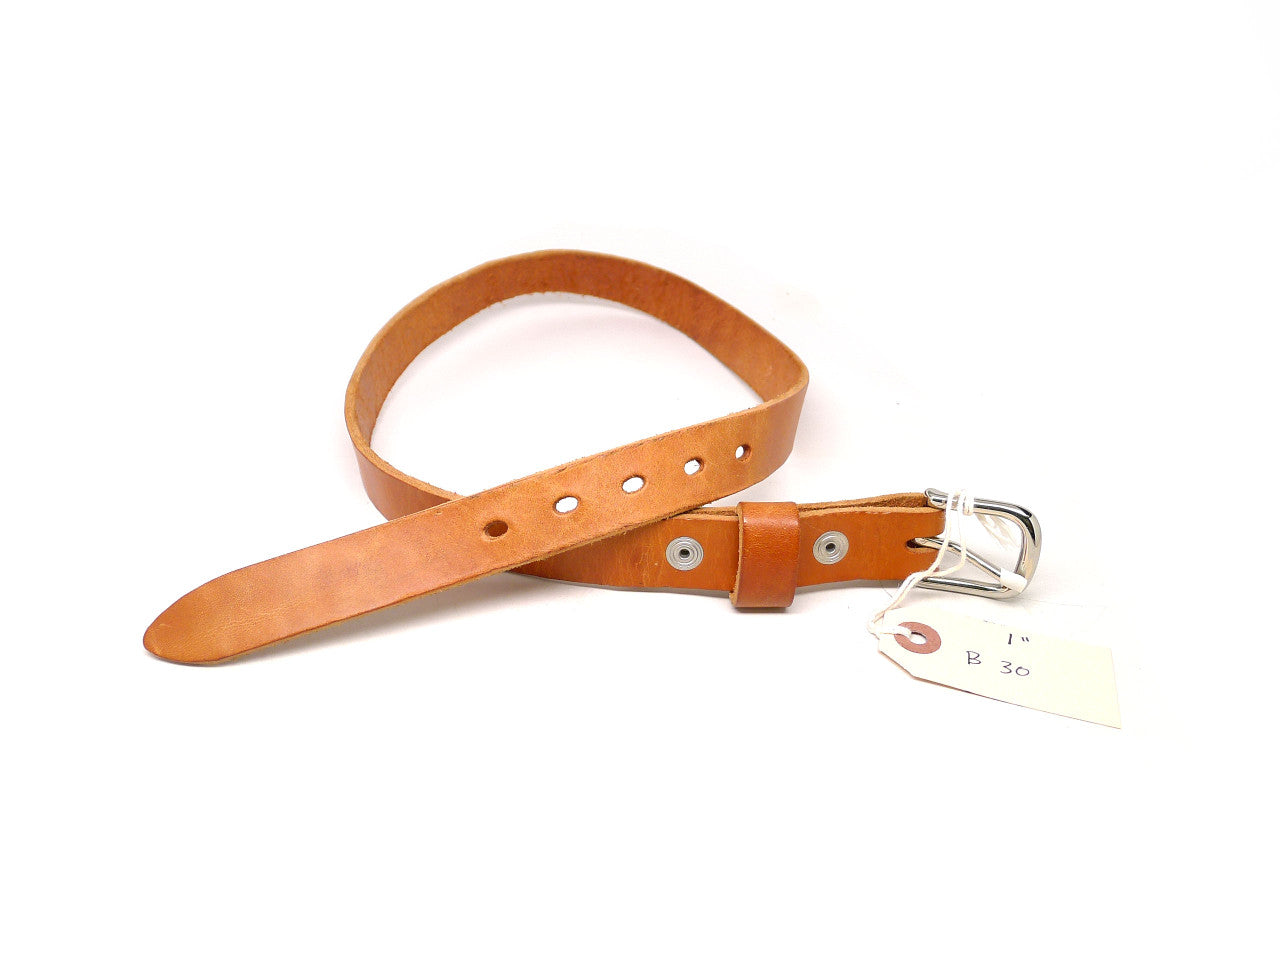 Handmade 1" Leather Belt Size 30 - Natural (B) Clearance